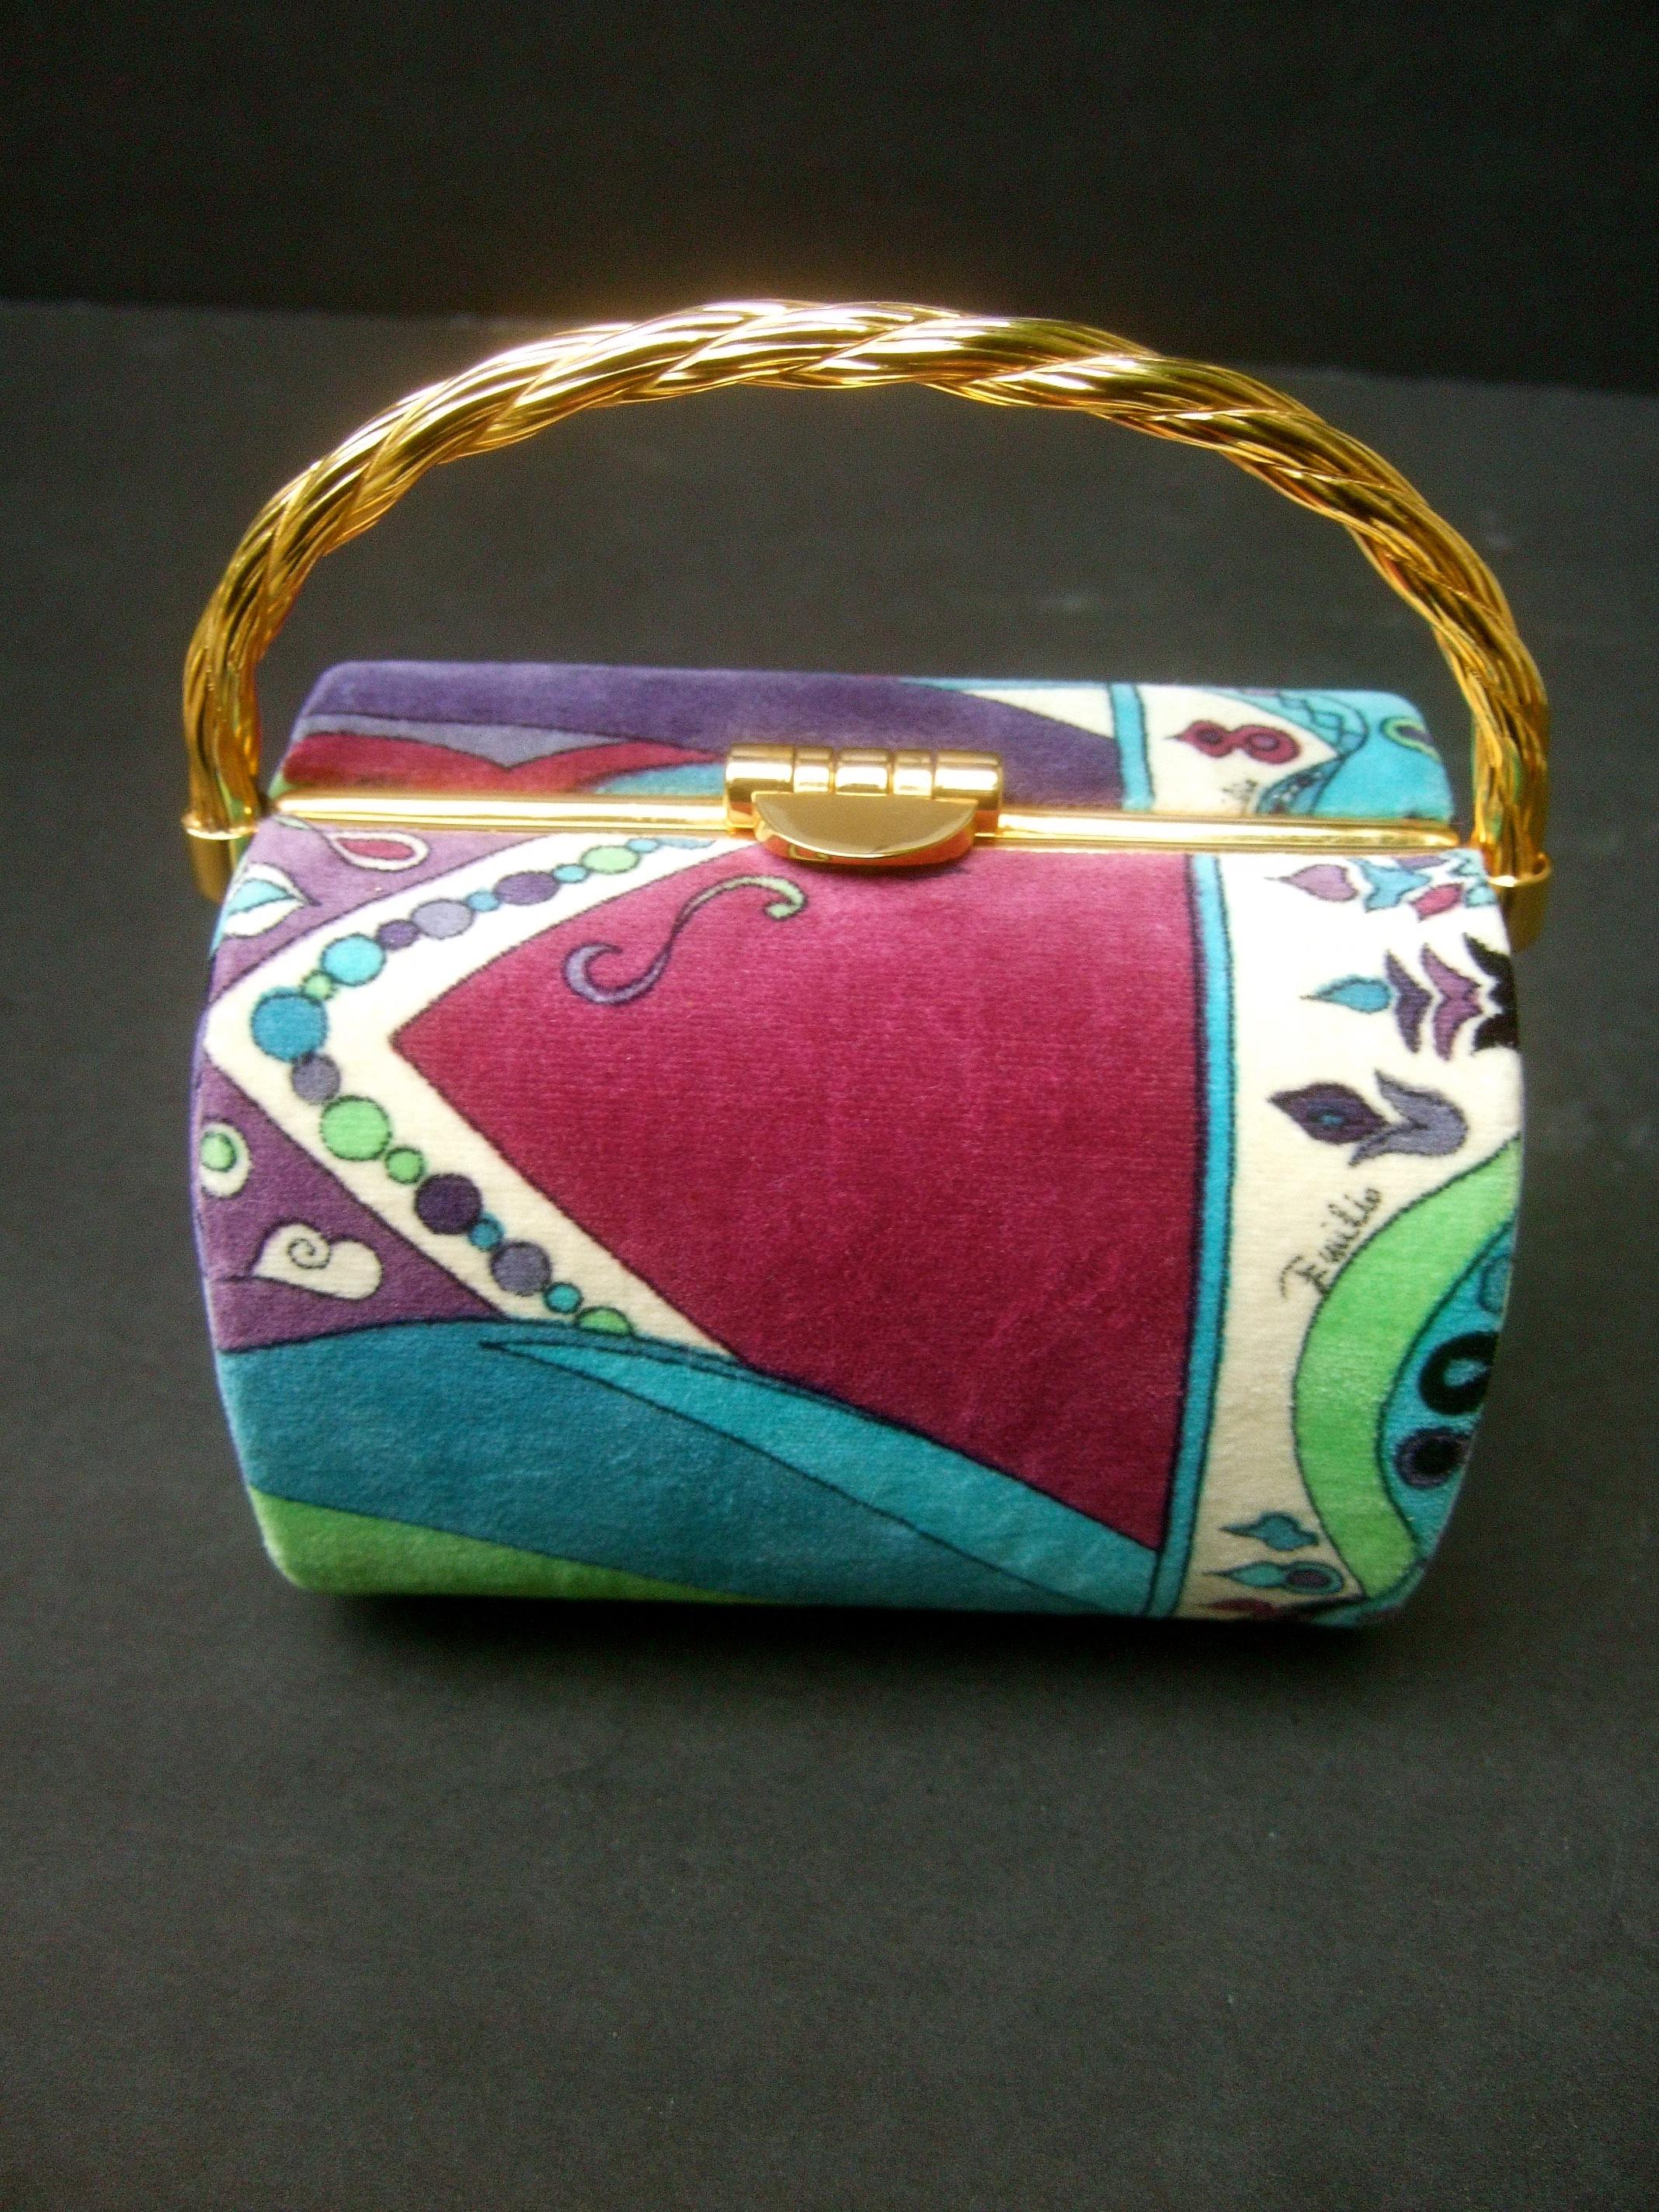 Emilio Pucci Iconic pastel velvet box purse c 1970
The luxurious barrel cylinder-shaped handbag is covered with Pucci's 
plush pastel velvet print. Emilo's script name is concealed within the  
the vibrant velvet print covering

Adorned with a sleek